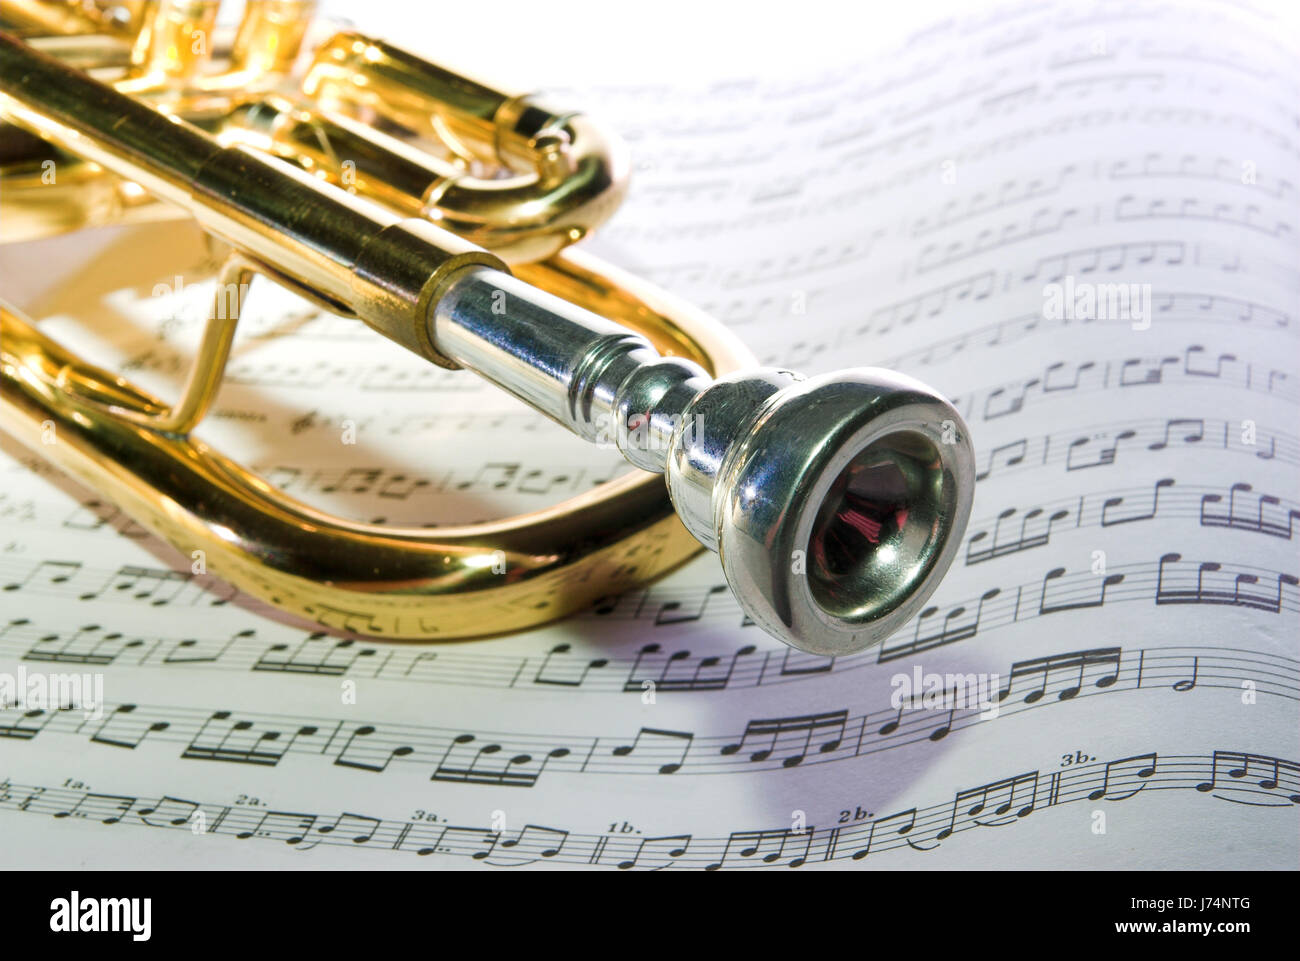 golden notes music notes trumpet act music game tournament play playing plays Stock Photo